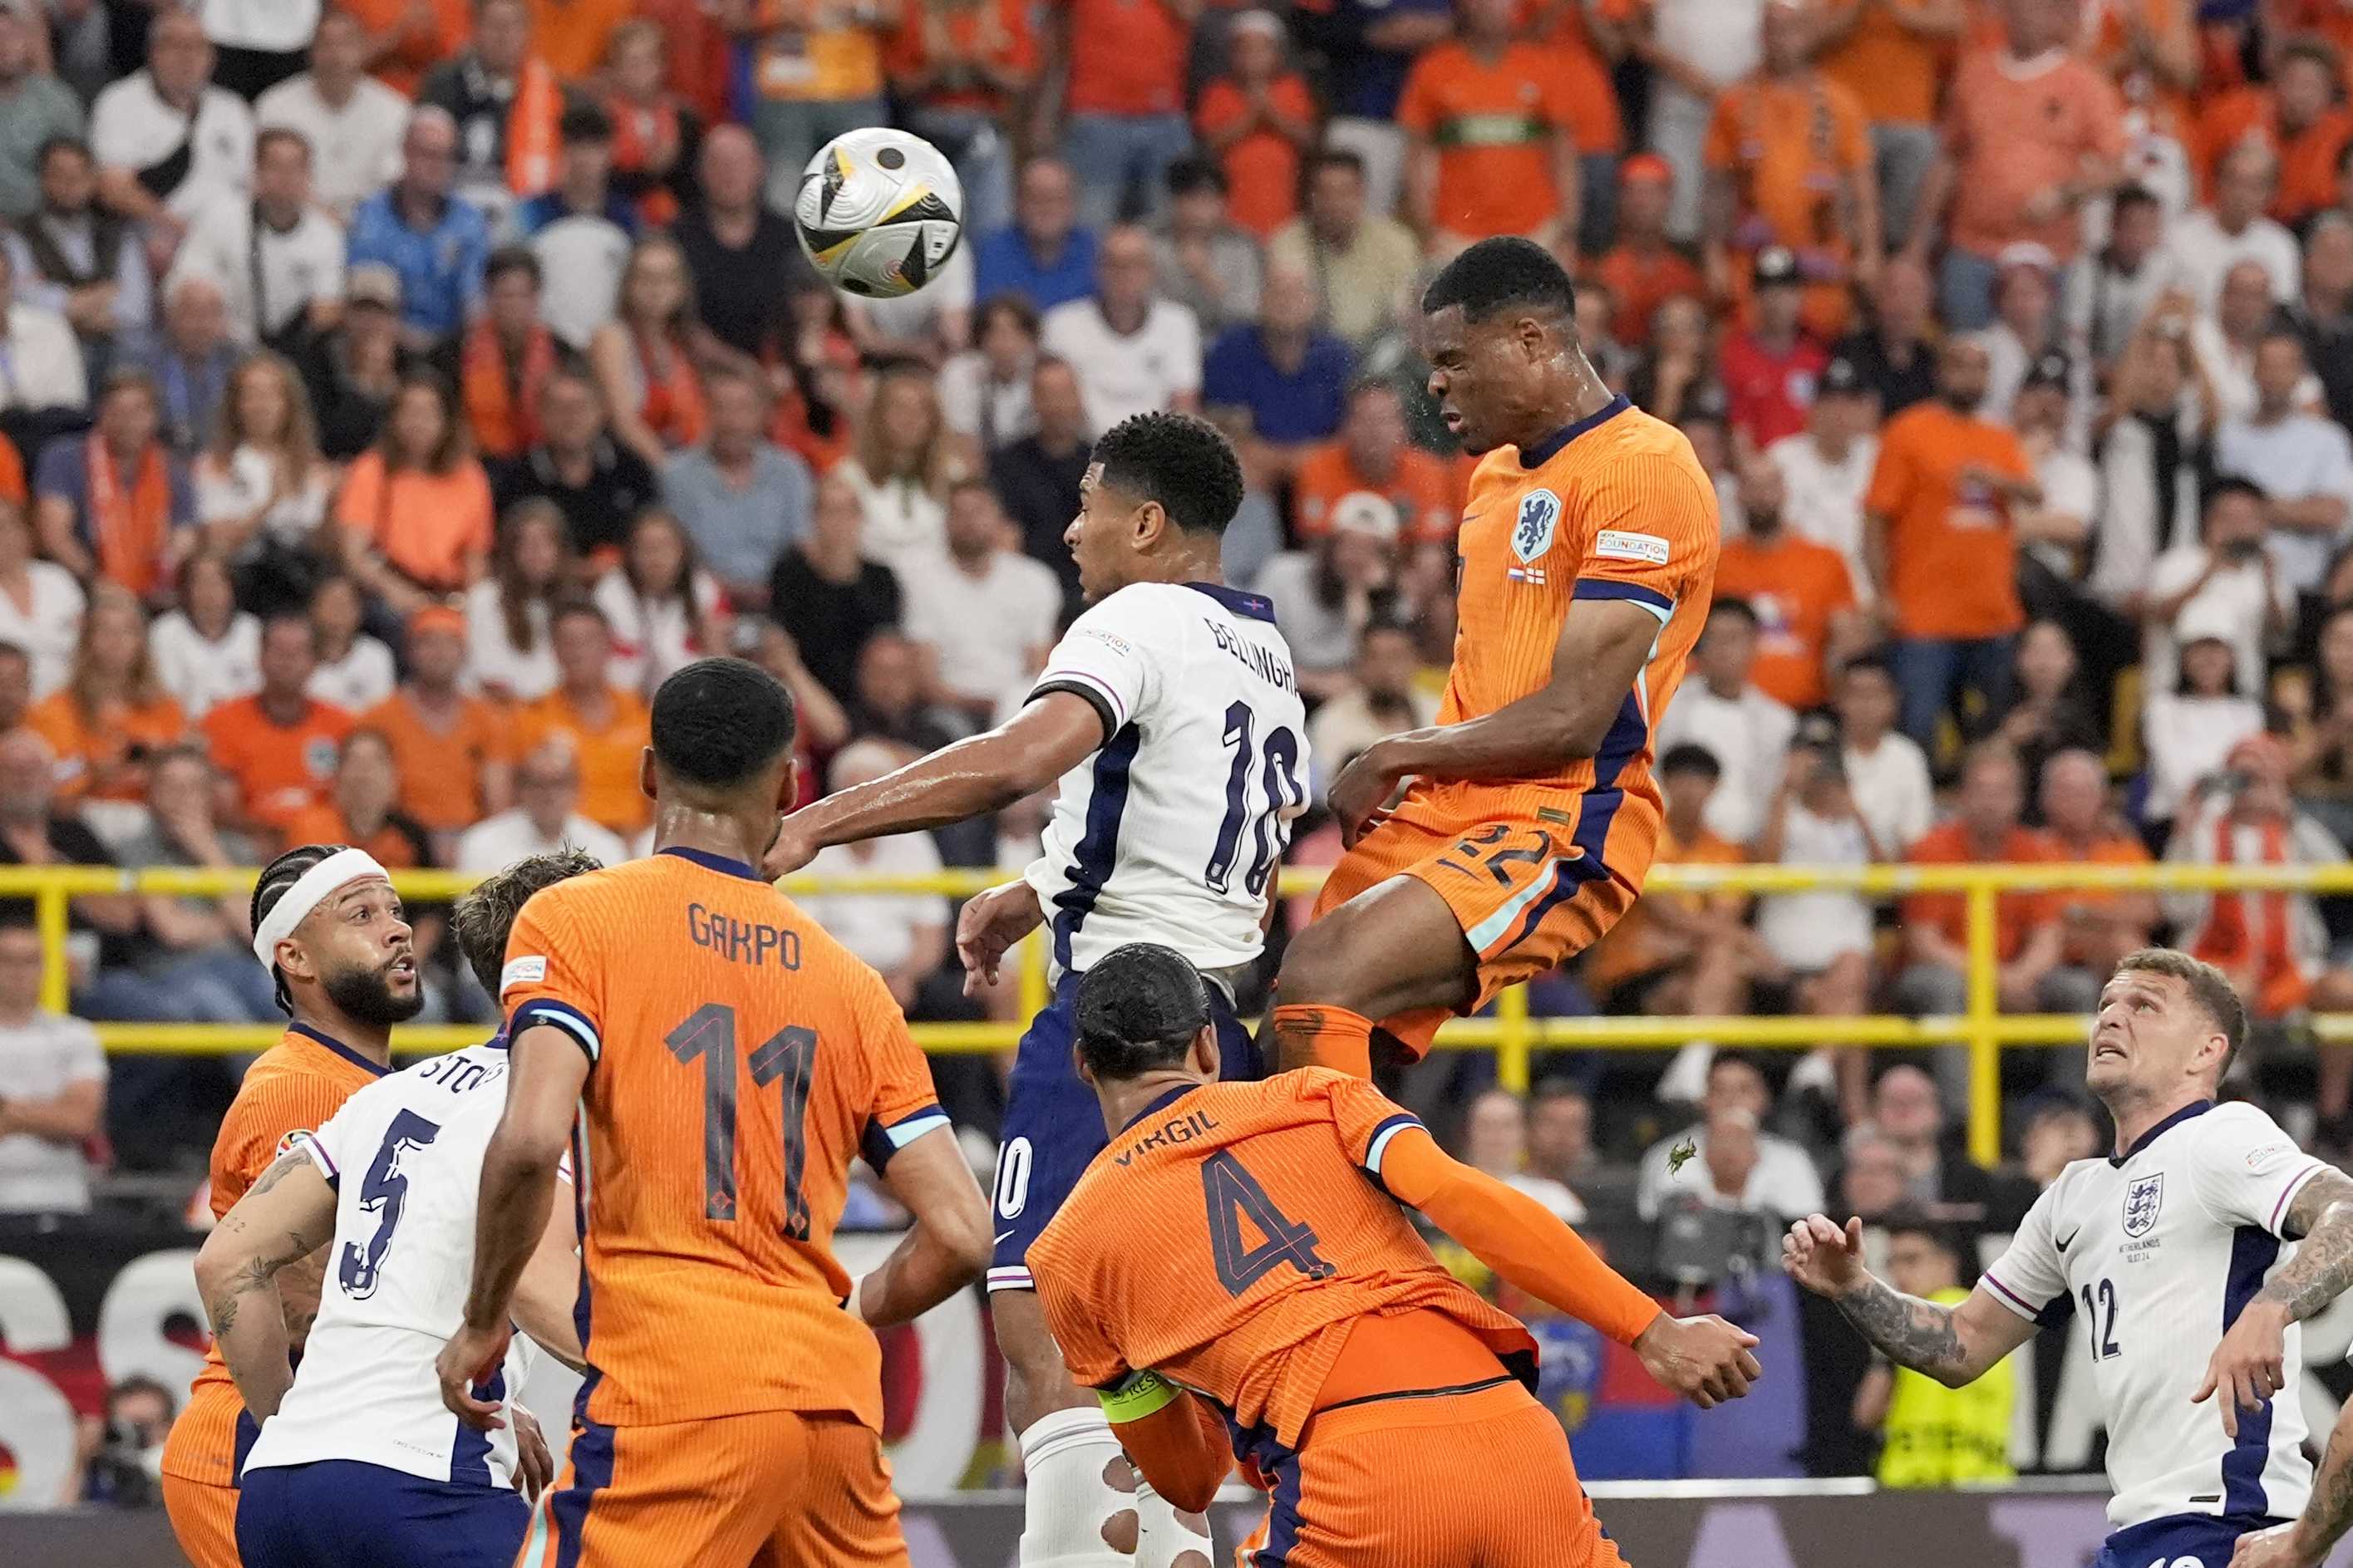 Denzel Dumfries of the Netherlands, center right, attempts a header at goal during a semifinal match between the Netherlands and England at the Euro 2024 soccer tournament in Dortmund, Germany, Wednesday, July 10, 2024. (AP Photo/Martin Meissner)